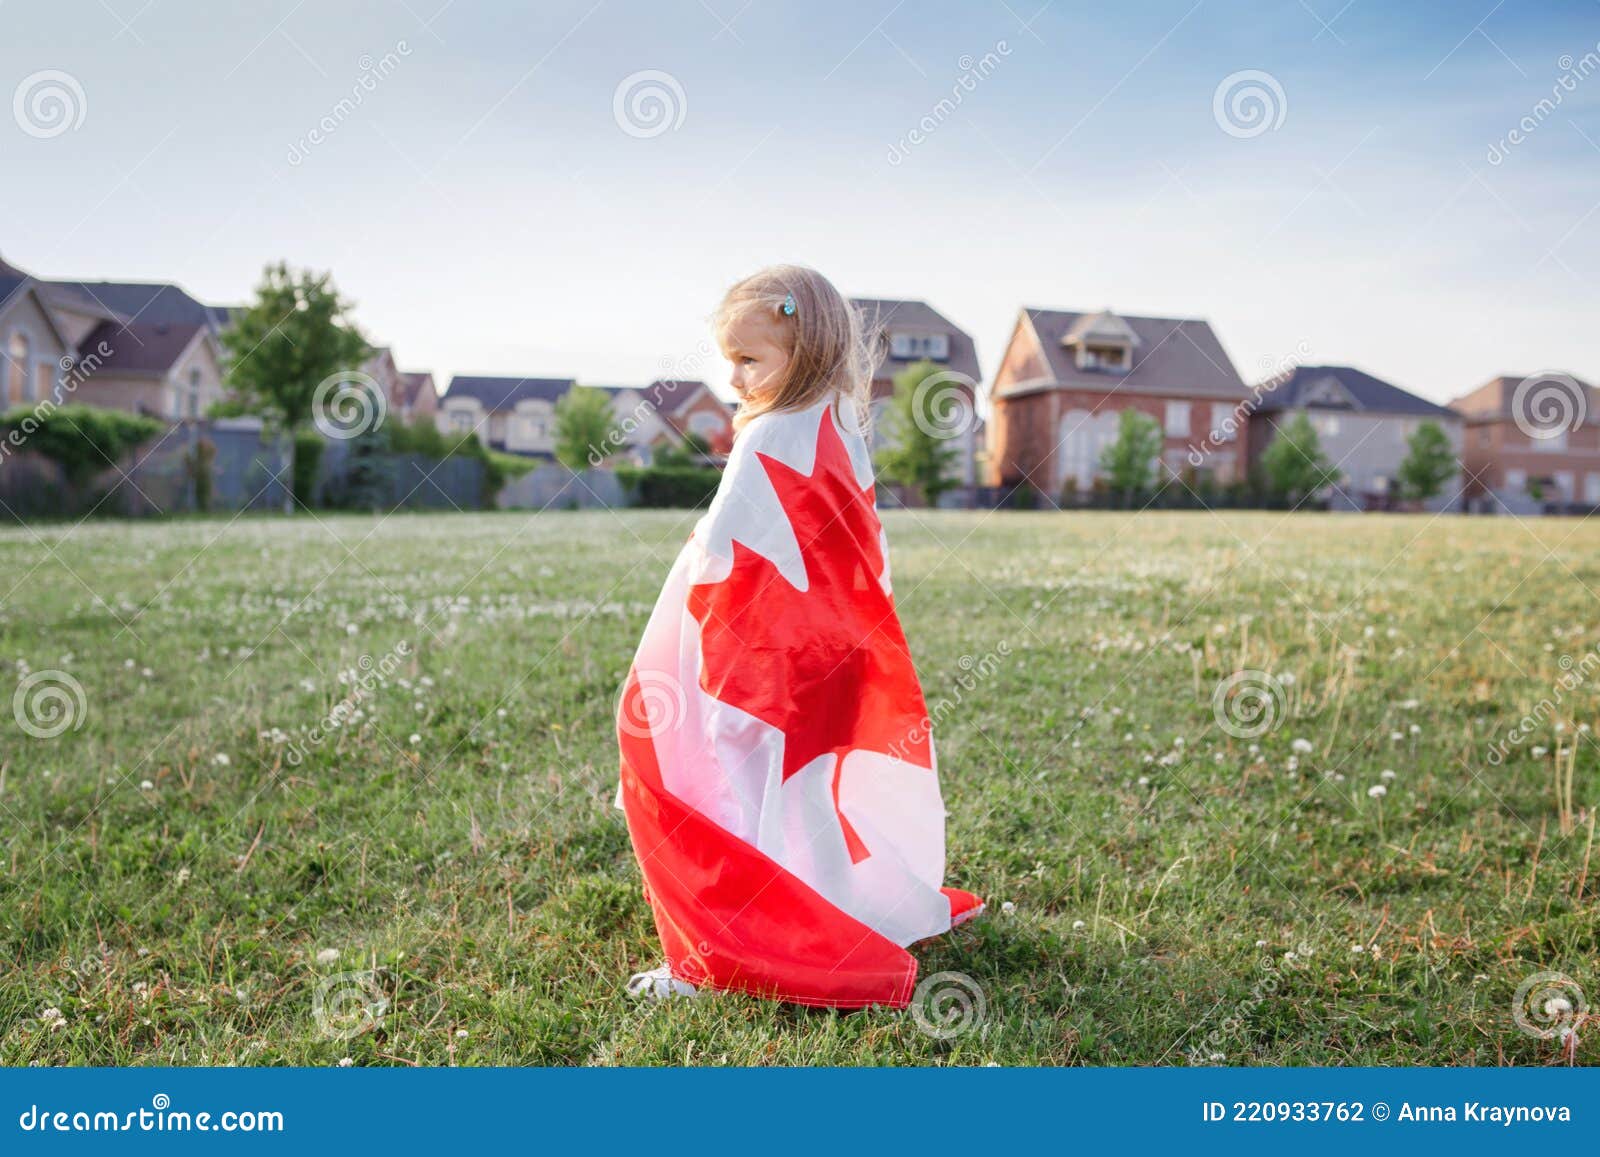 Little Girl Toddler Wrapped in Large Canadian Flag Walking in Park Meadow Outdoor.  Canada Day Celebration Outside Stock Photo - Image of child, flag: 220933762